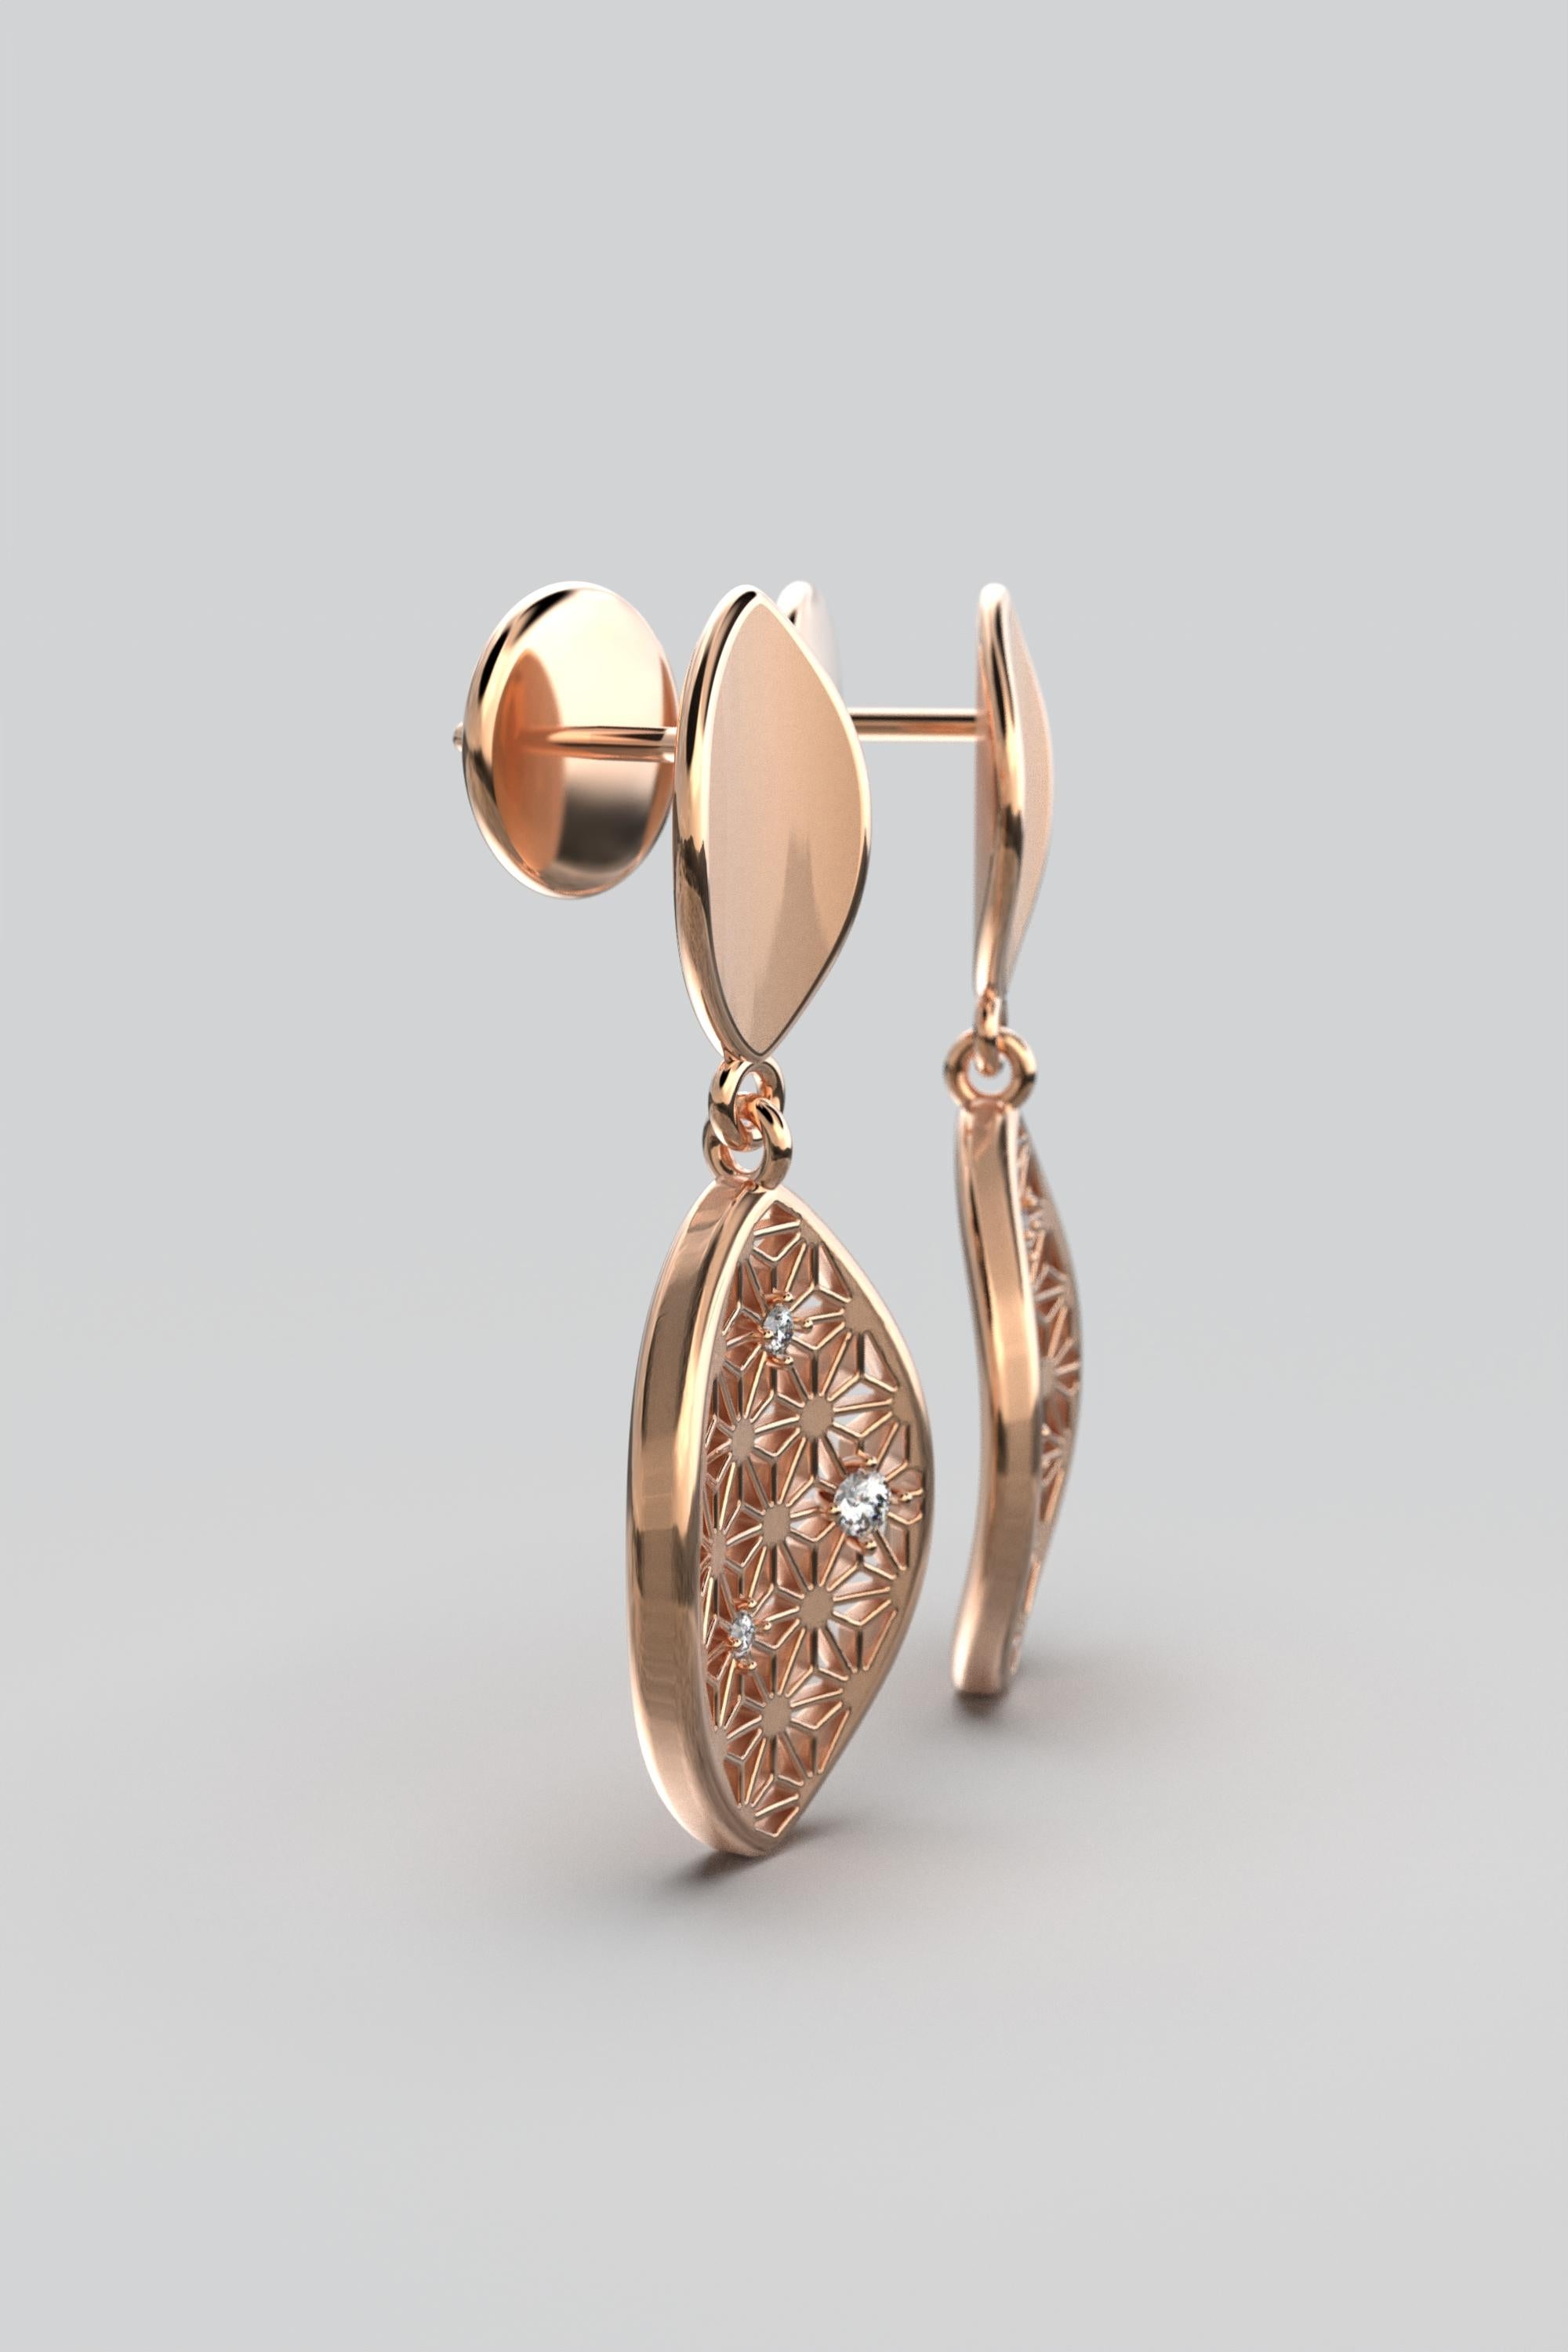 Italian Diamond Earrings in 18k Solid Gold with Japanese Sashiko Pattern For Sale 4